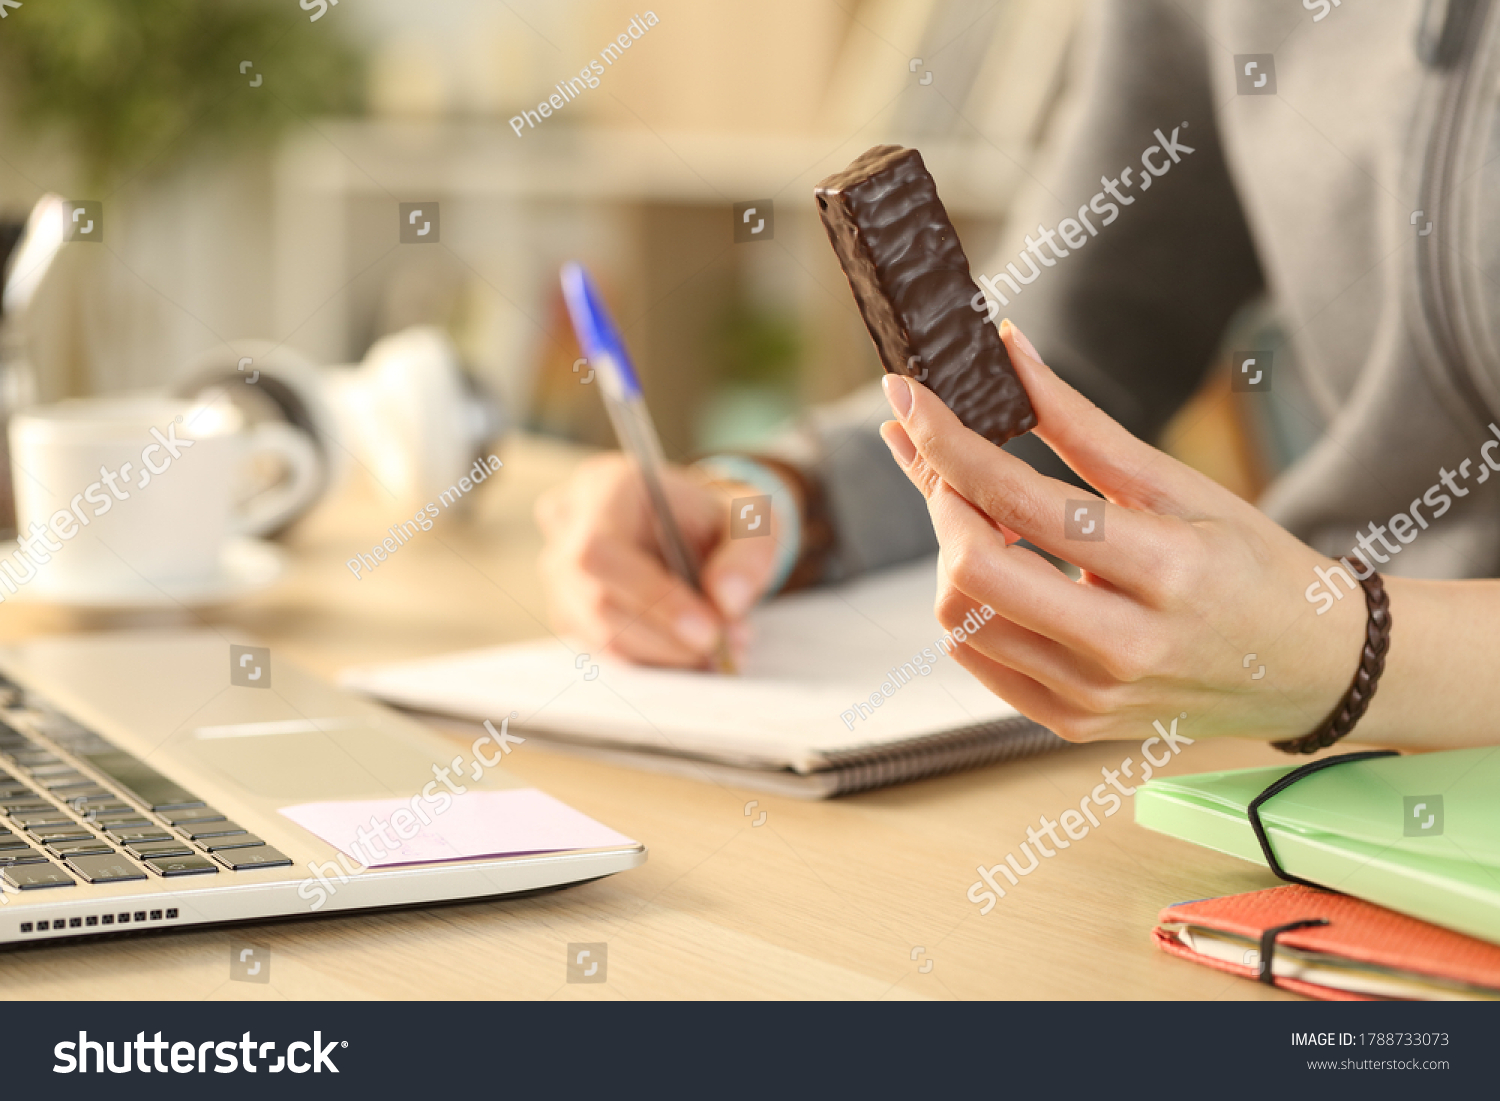 Close up of student girl hands holding chocolate snack bar studying at home #1788733073